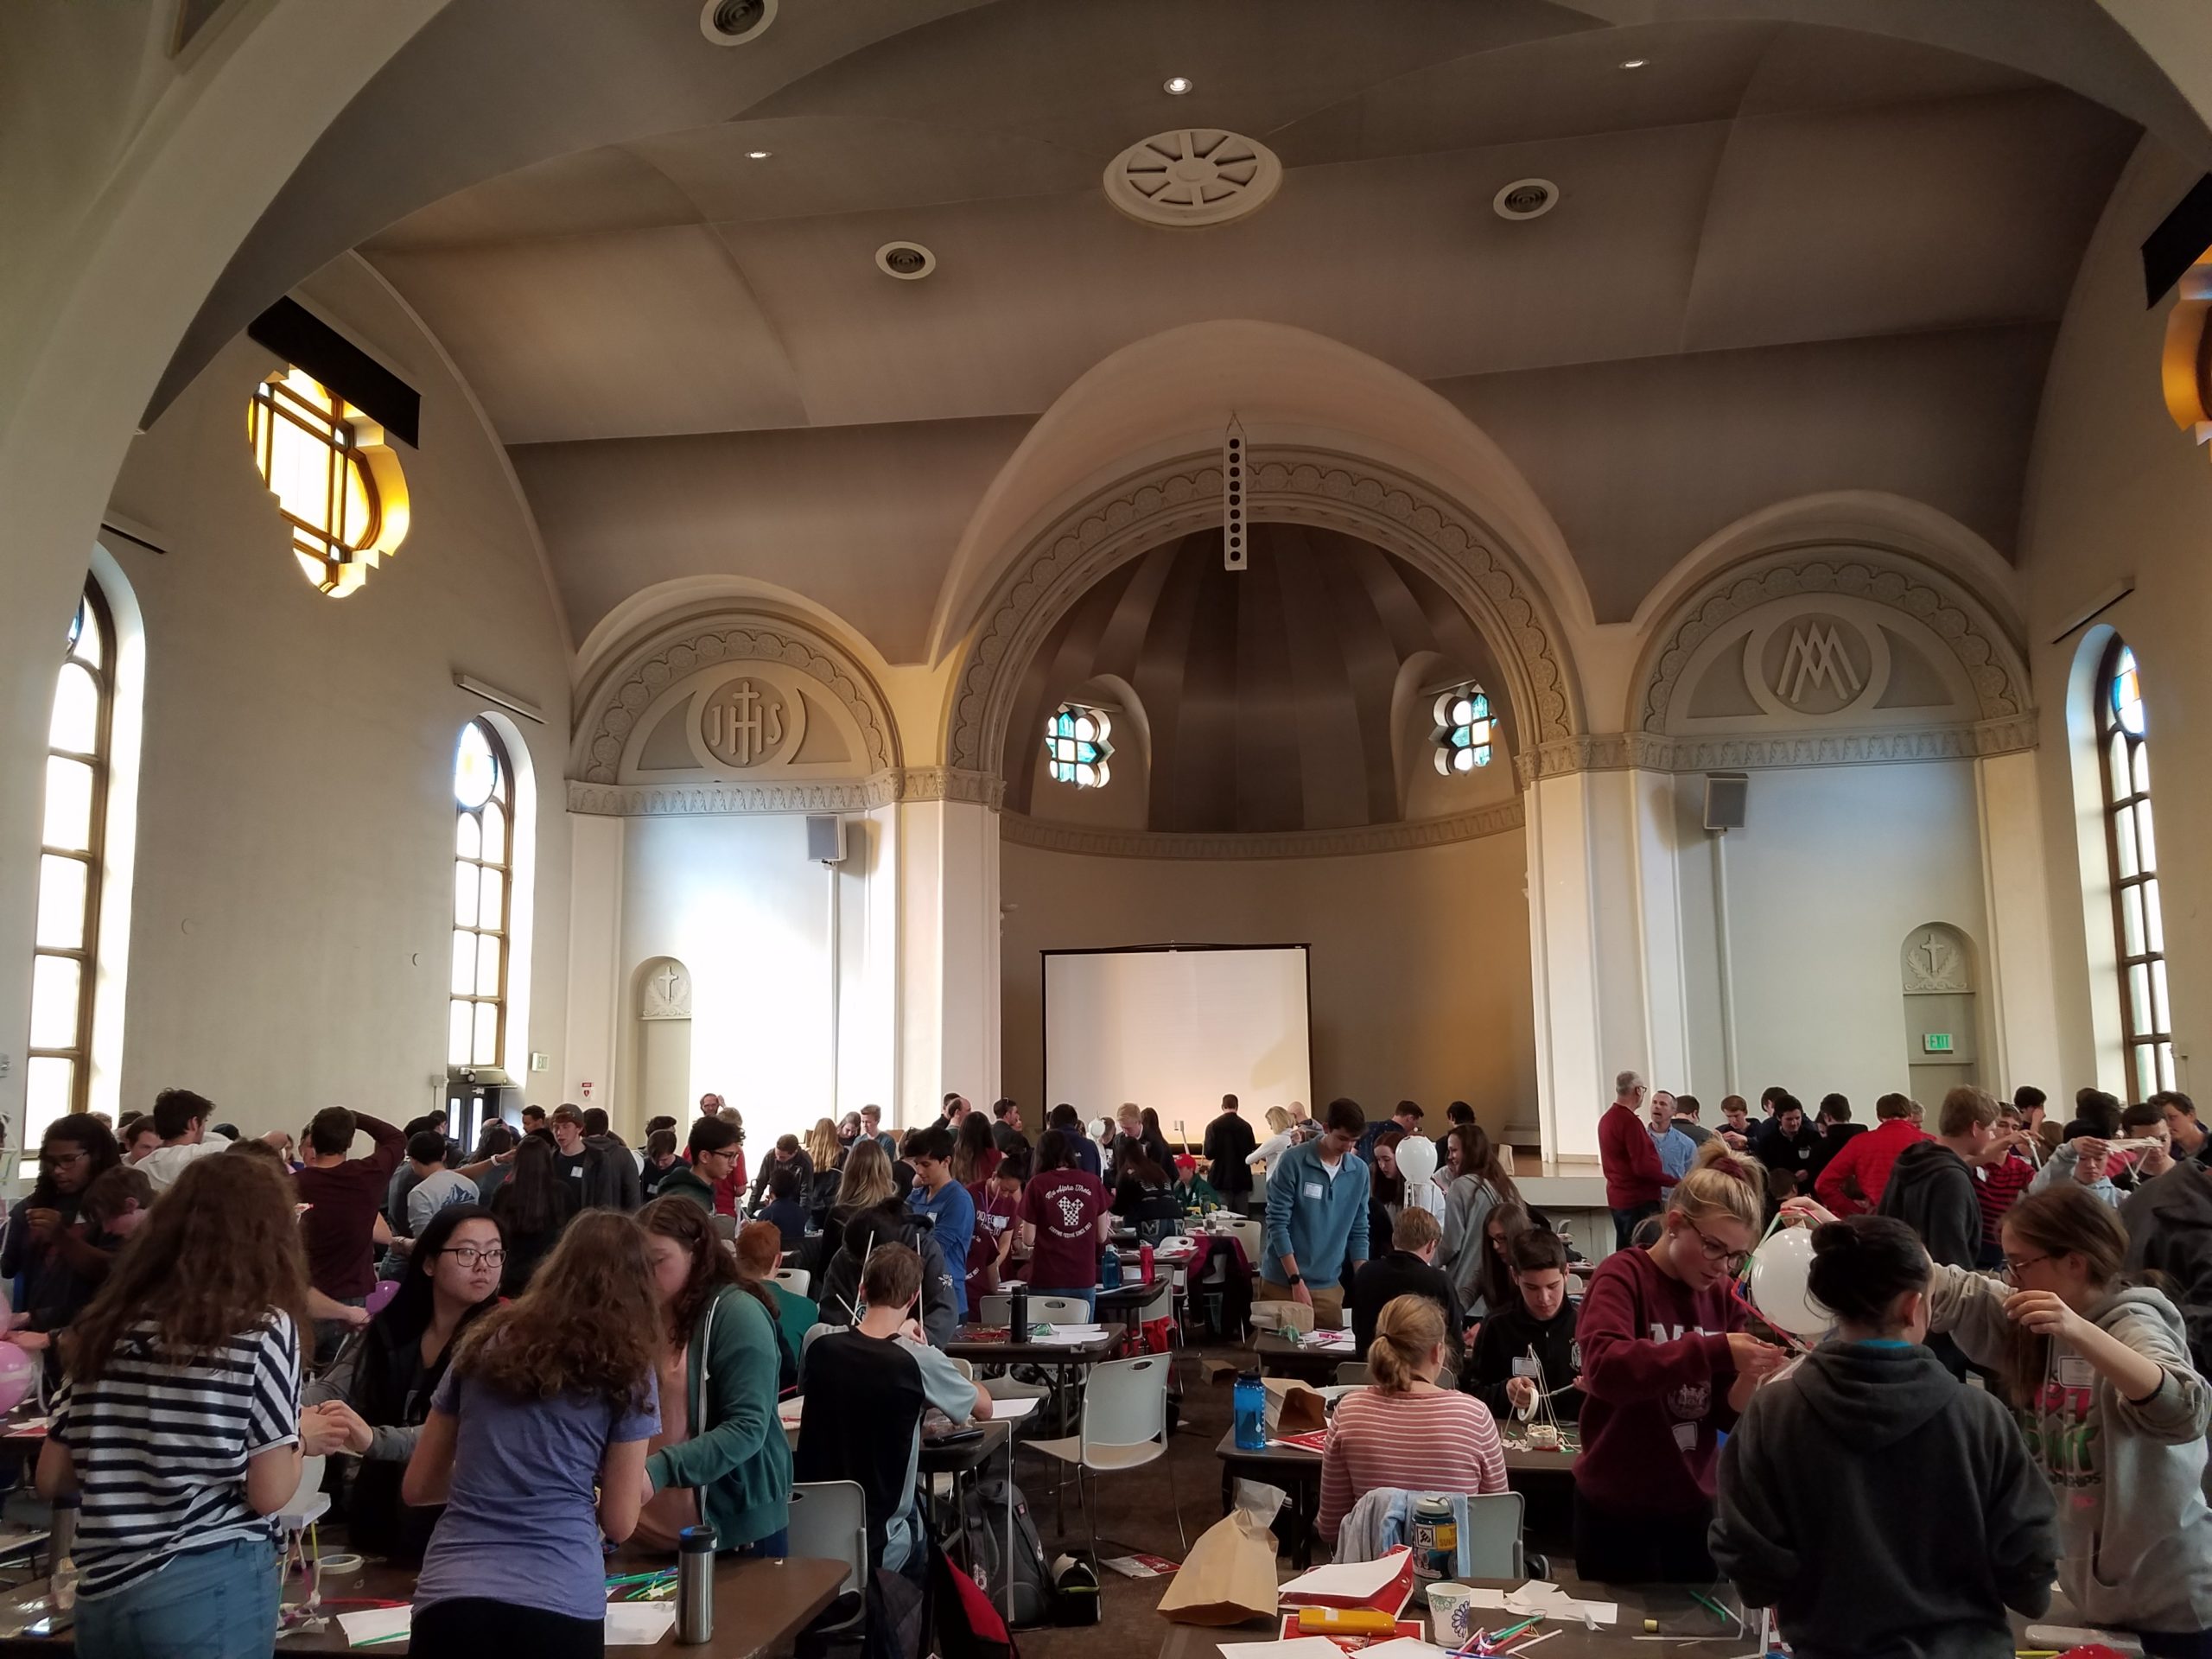 Students gather around tables at the Math day celebration in St. Cajetan's church